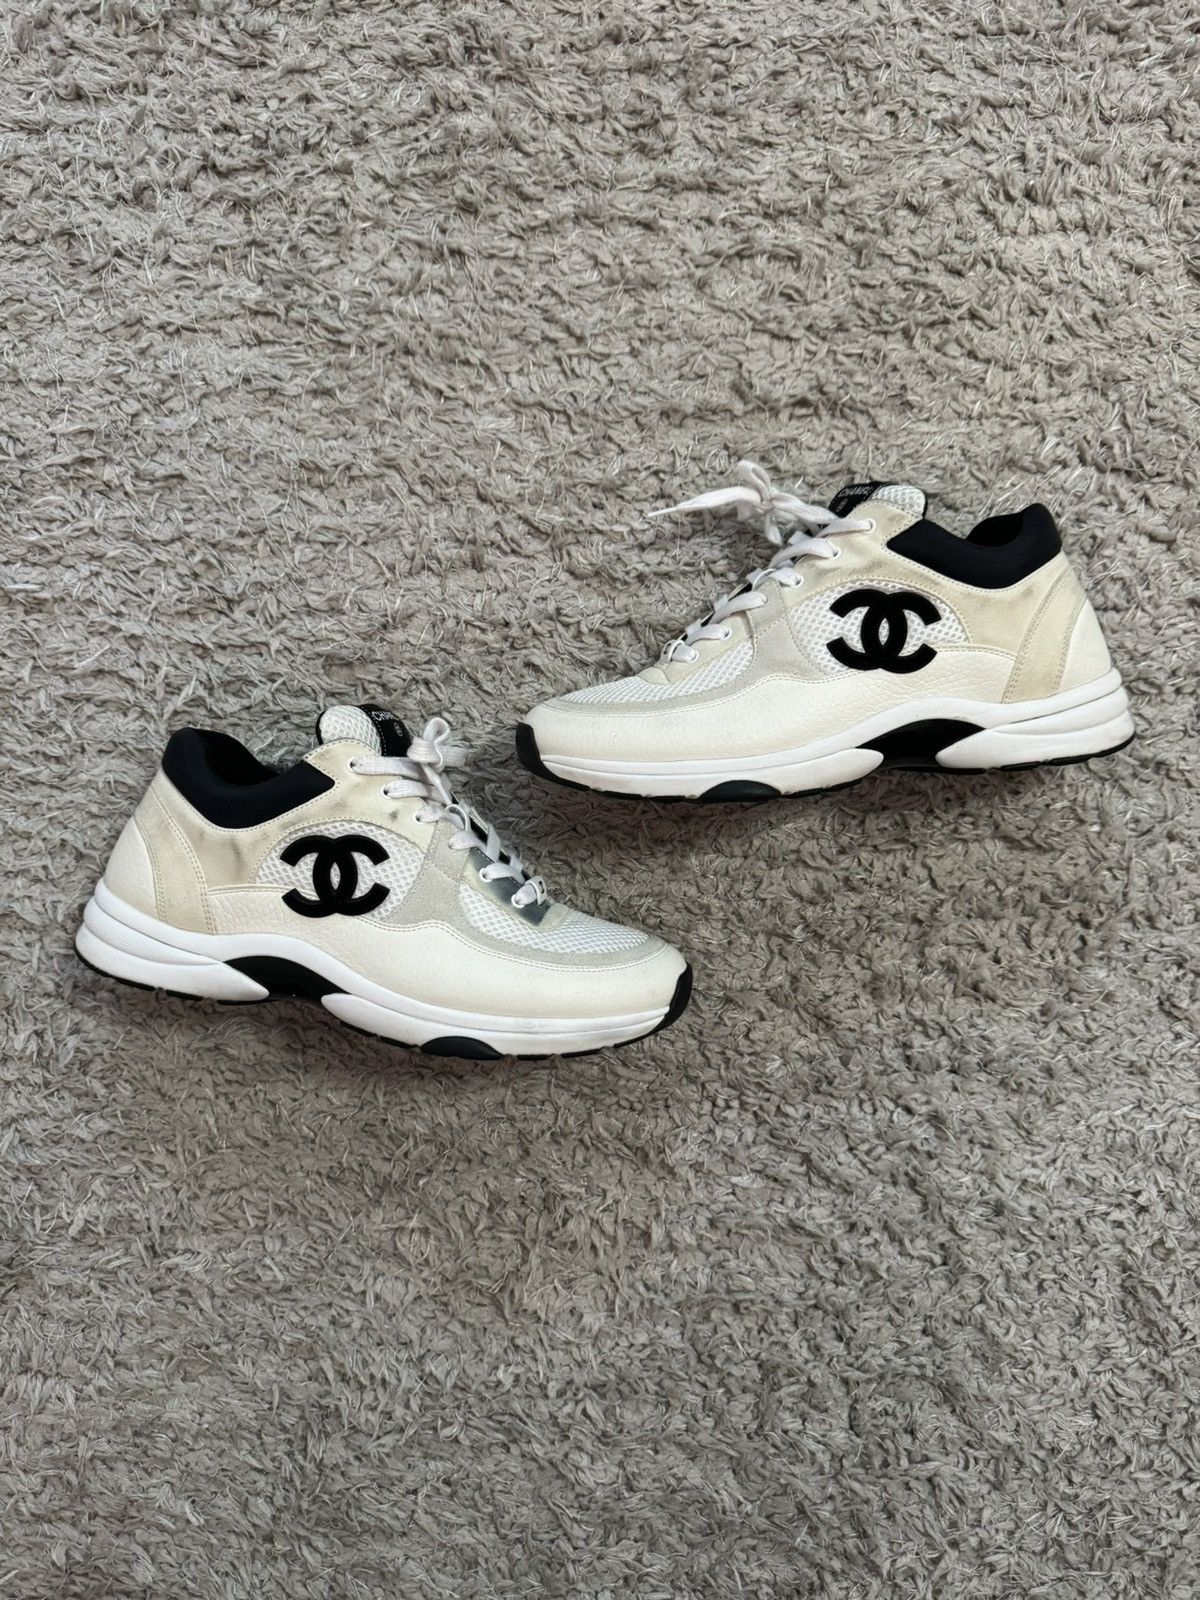 Pre-owned Chanel Runners Black And White Shoes